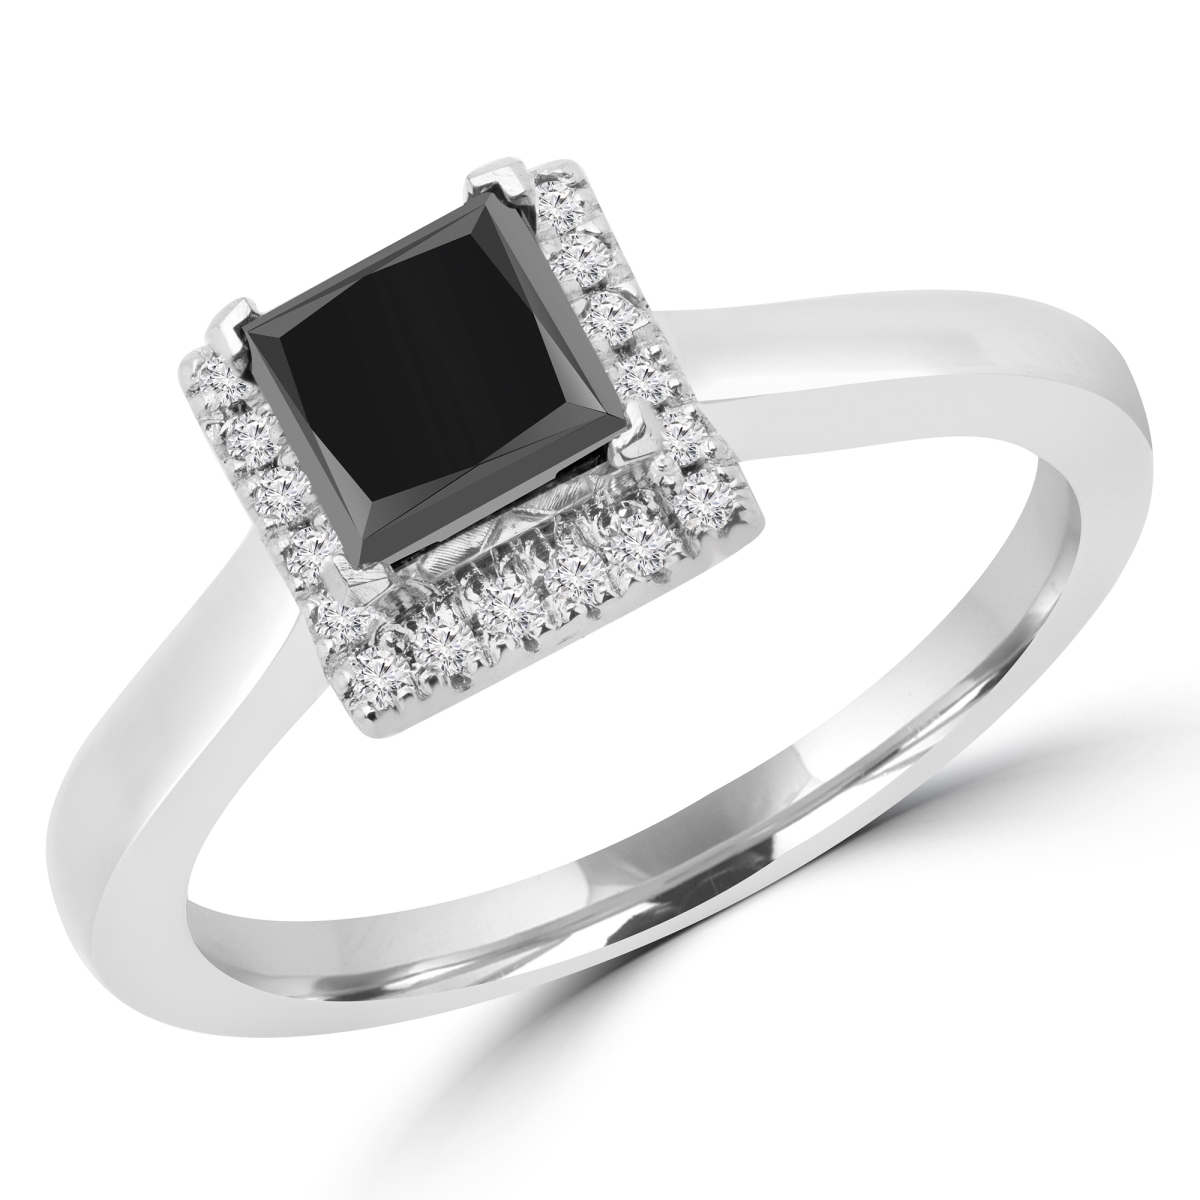 Picture of Majesty Diamonds MD170176-8 0.9 CTW Princess Black Diamond Halo Engagement Ring in 14K White Gold - 8